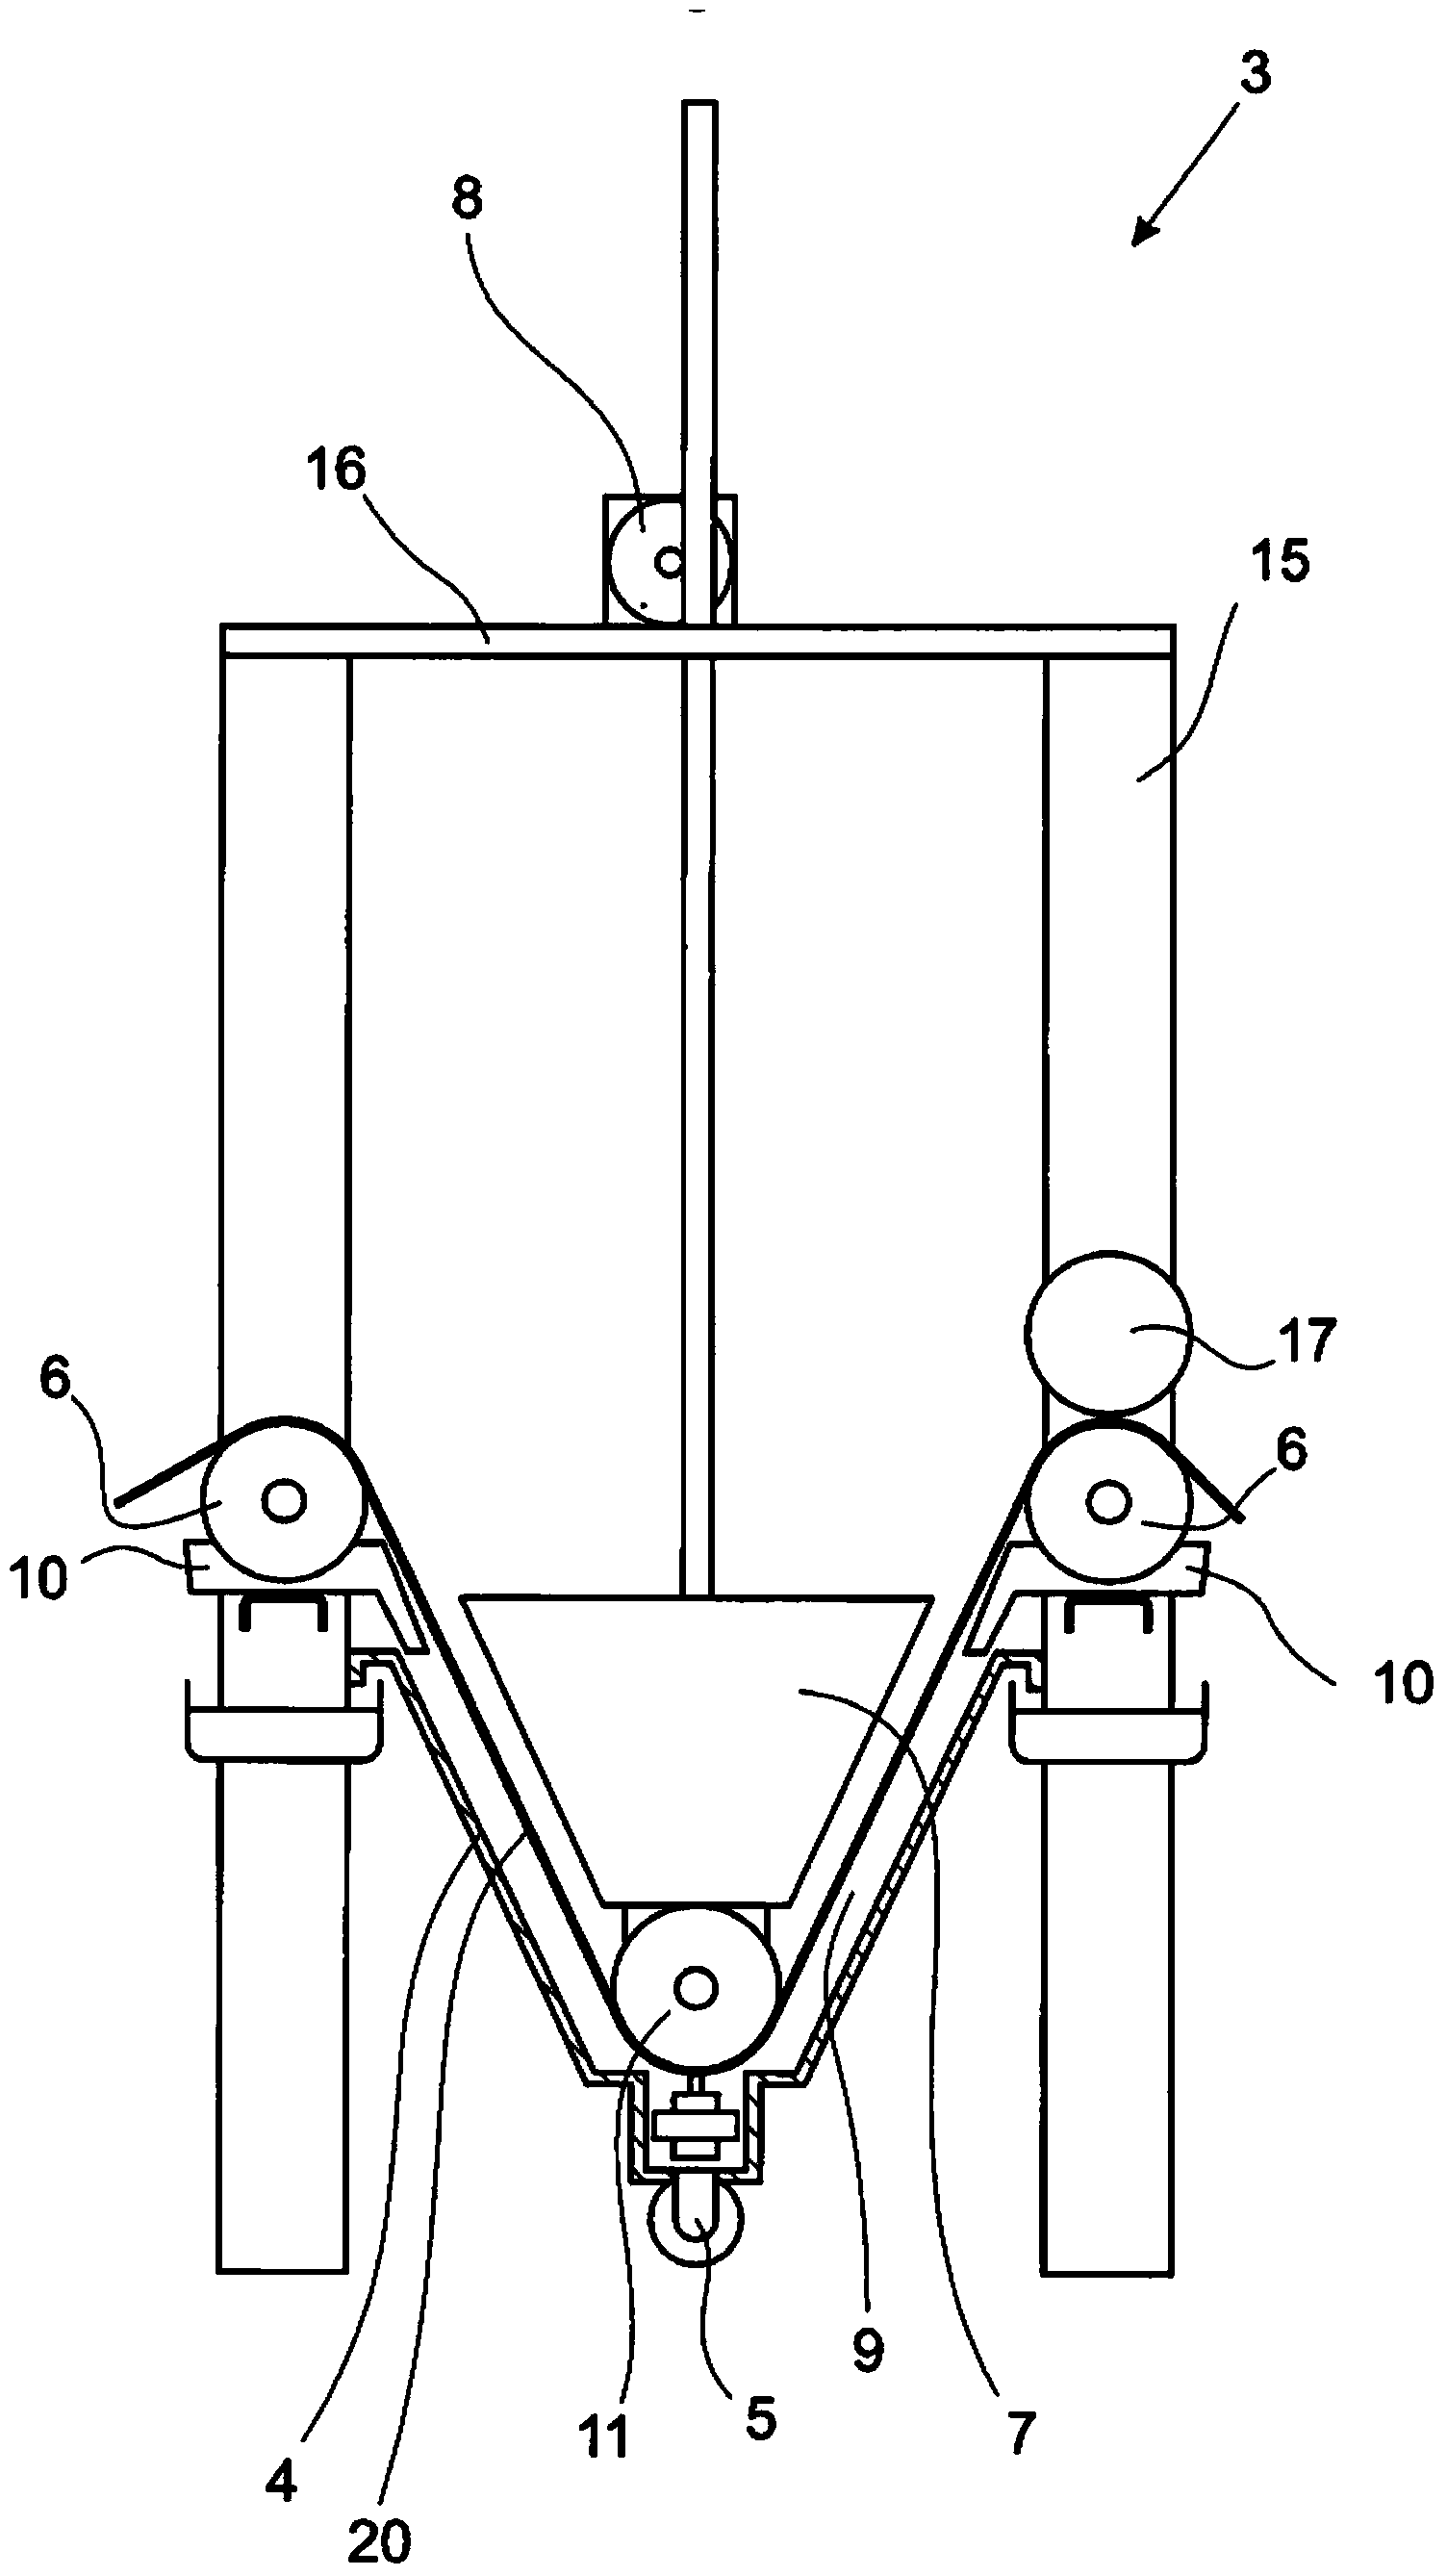 Device and method for the treatment, in particular electrolysis or cleaning, of endless fibers, threads or webs of fabric